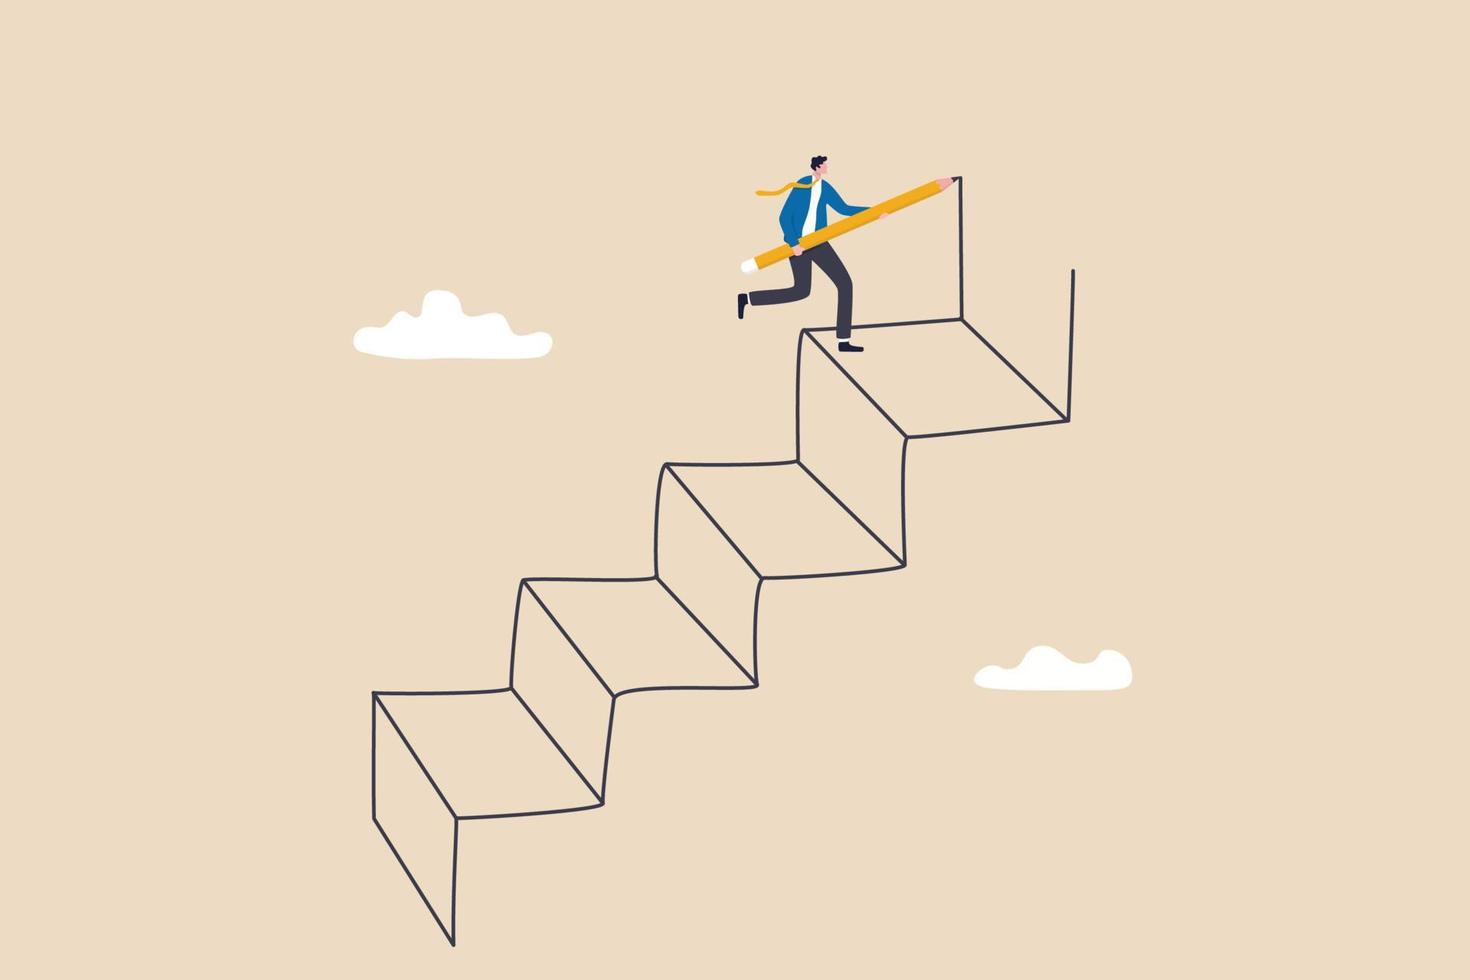 Ambition to progress and achieve goal, growing business or improvement, motivation to develop path or stair to success concept, smart businessman using pencil to draw big stair to climb up to success. vector